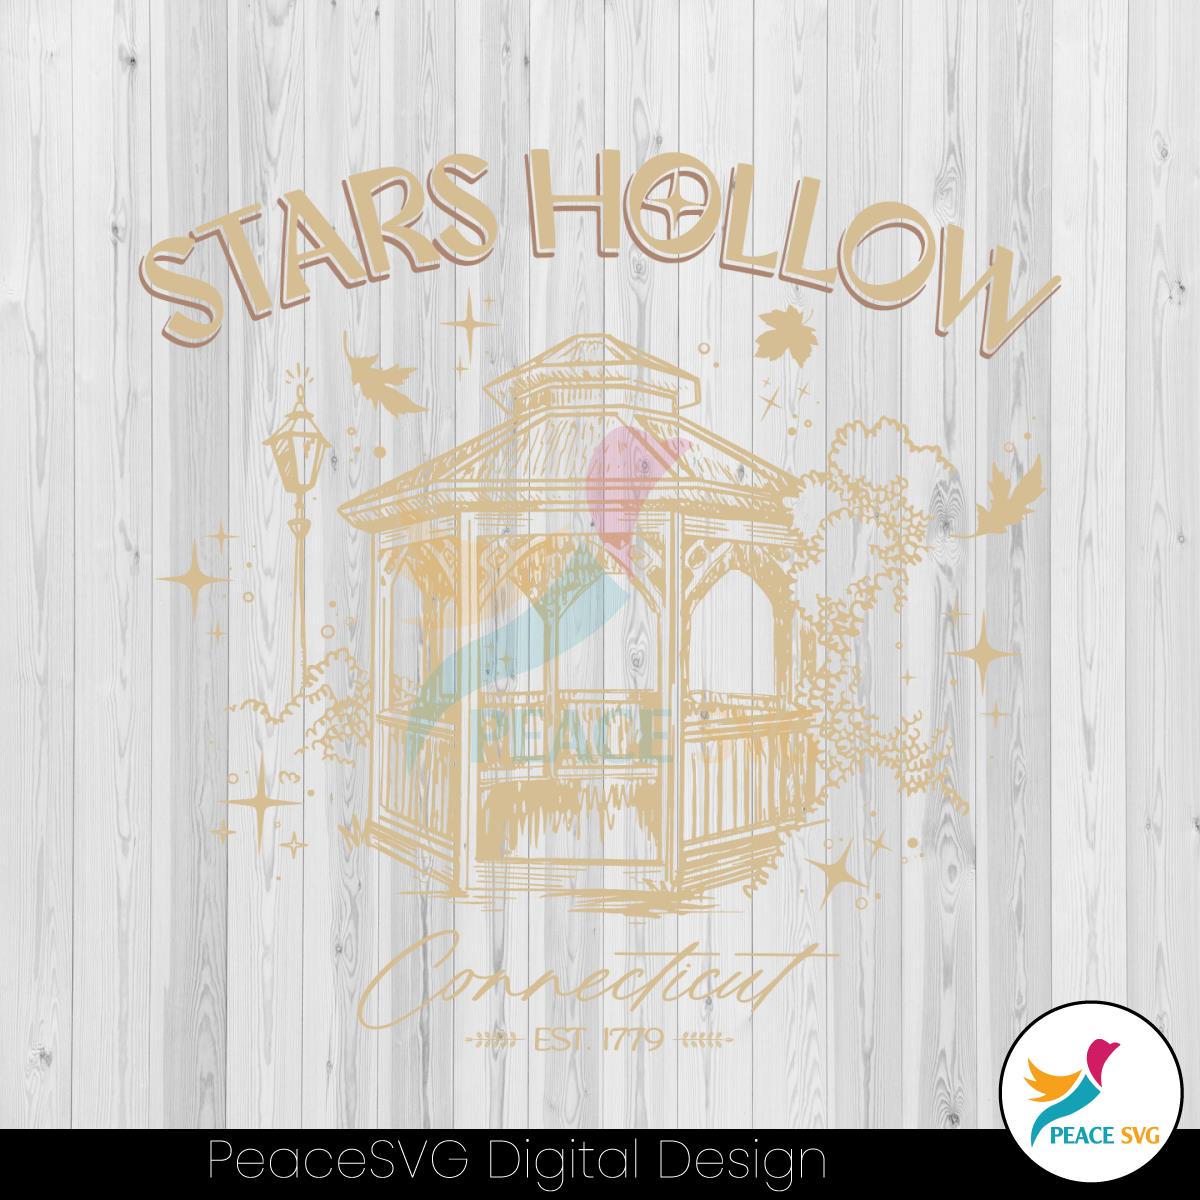 stars-hollow-connecticut-svg-gilmore-girls-series-svg-file